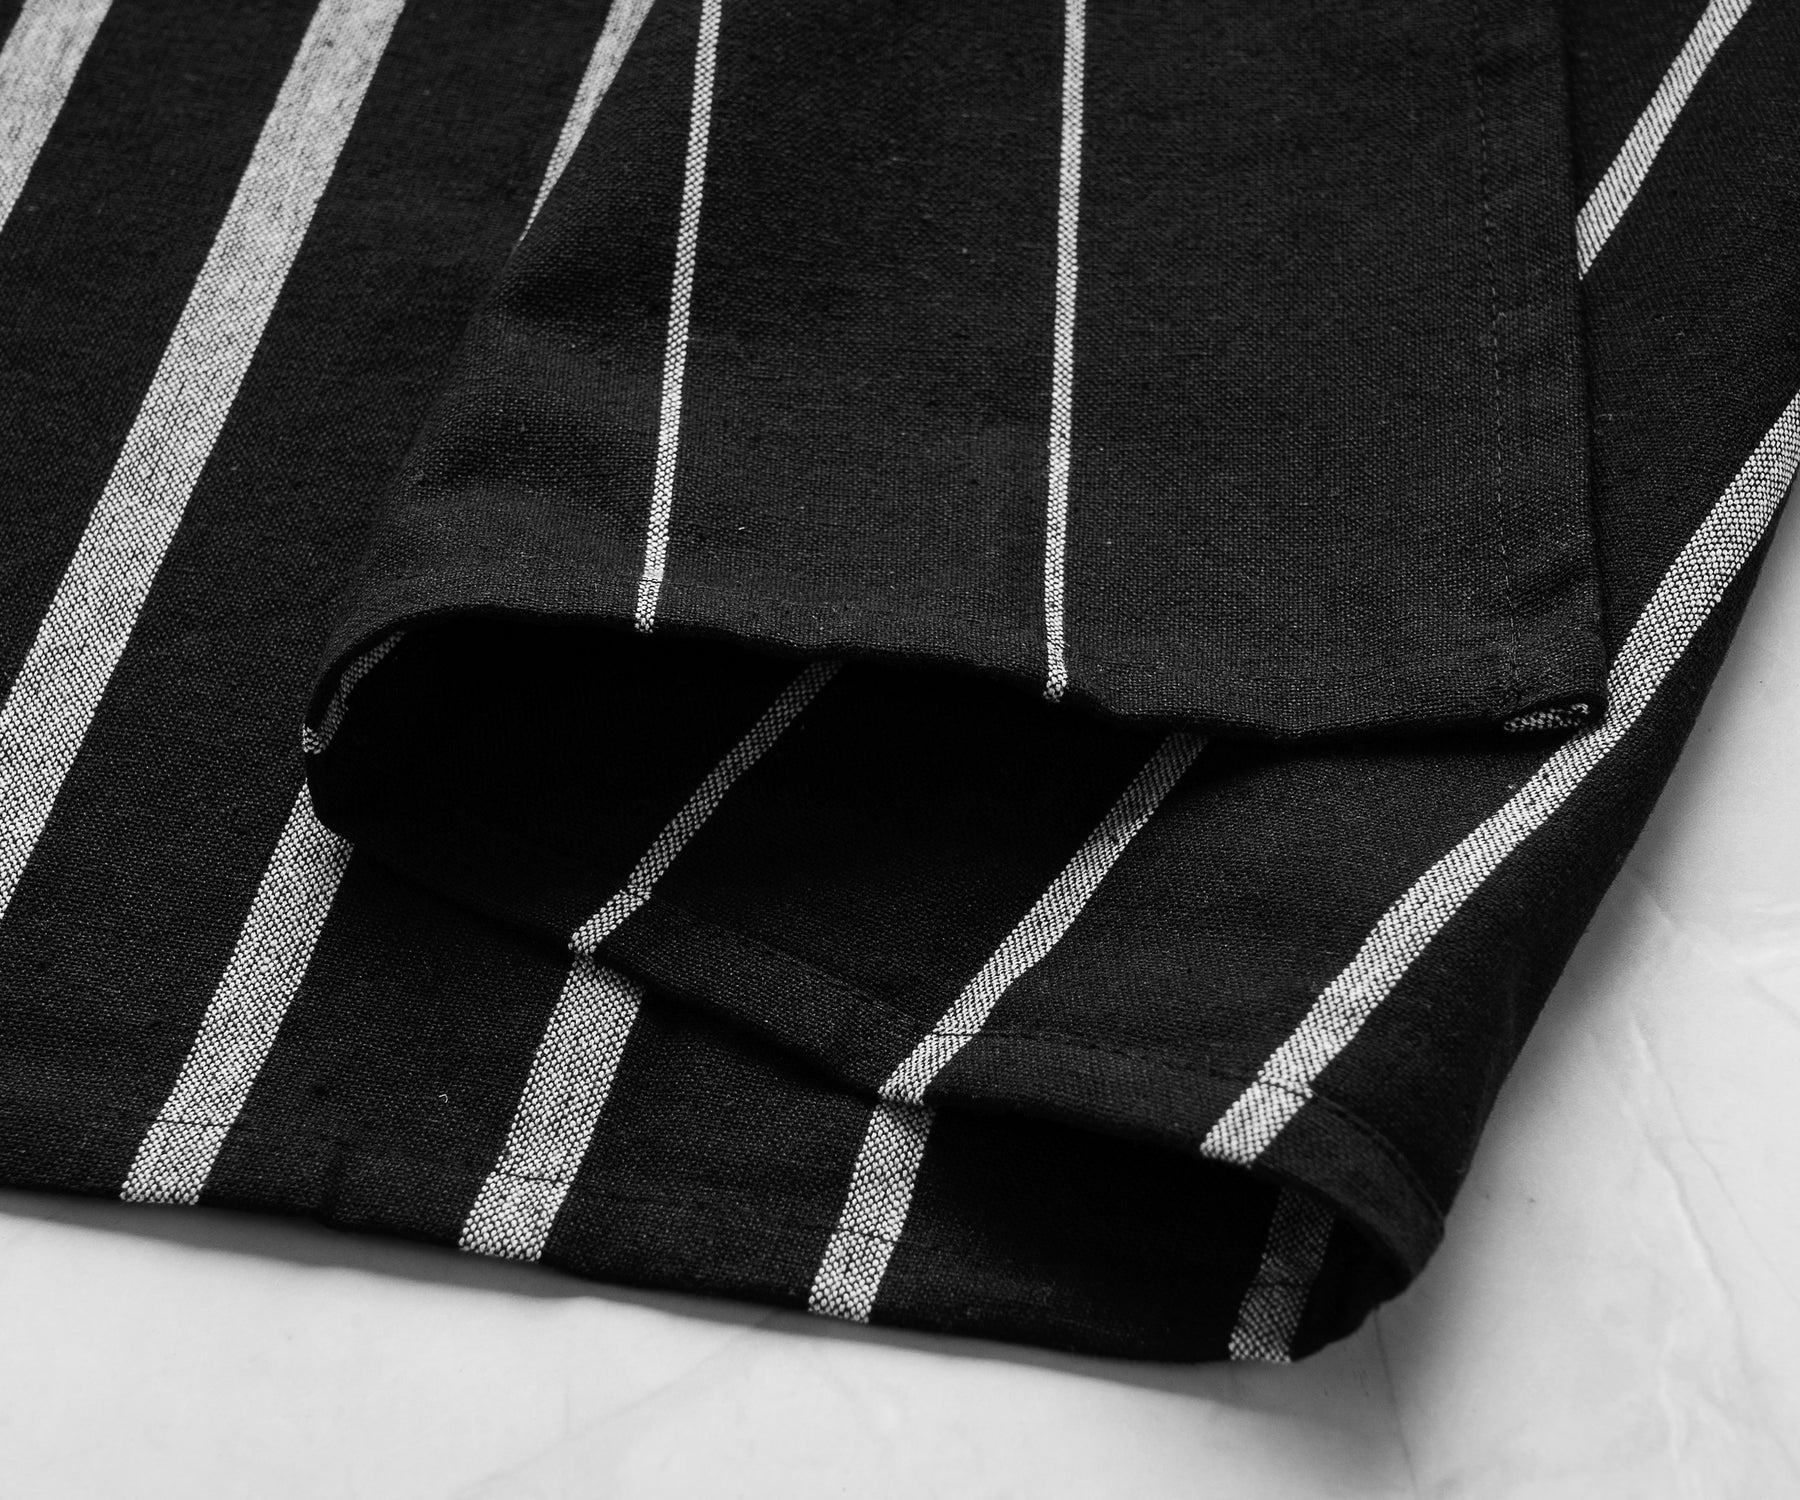 Dish Towels for Kitchen, Fall Kitchen Towels, Flour Sack Dish Towels, Geometry Kitchen Towels, Halloween Kitchen Towels, Kitchen Towels Cotton, Cotton Kitchen Towels, Kitchen Cotton TowelsSingle black and white striped rectangular dish towel with a contrasting stripe